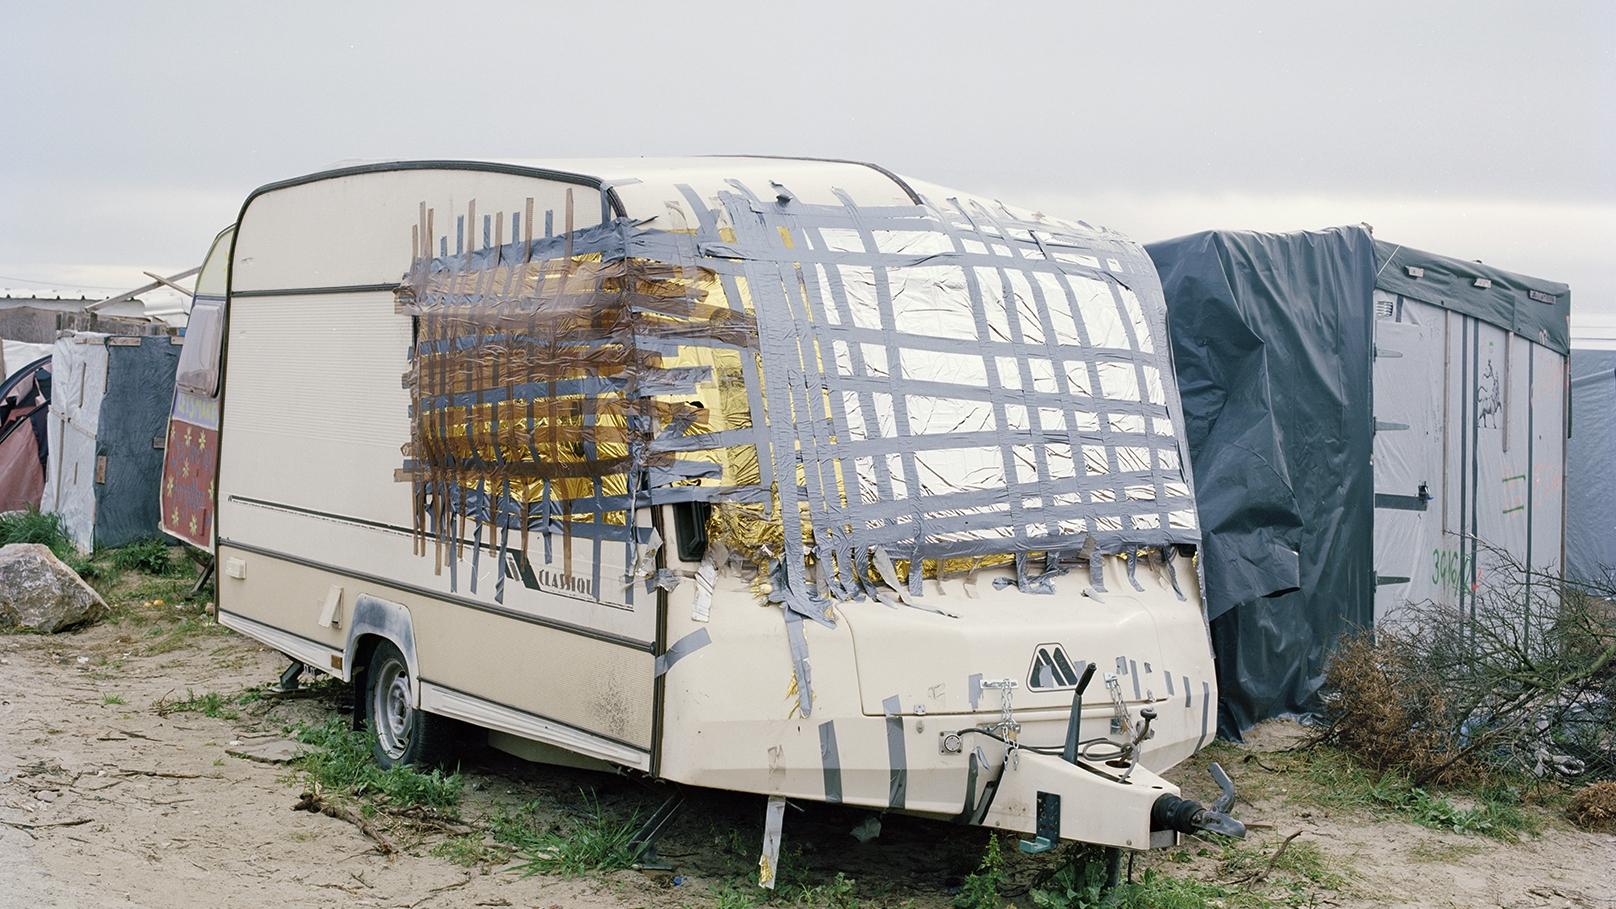 A caravan with taped-up windows in a refugee camp